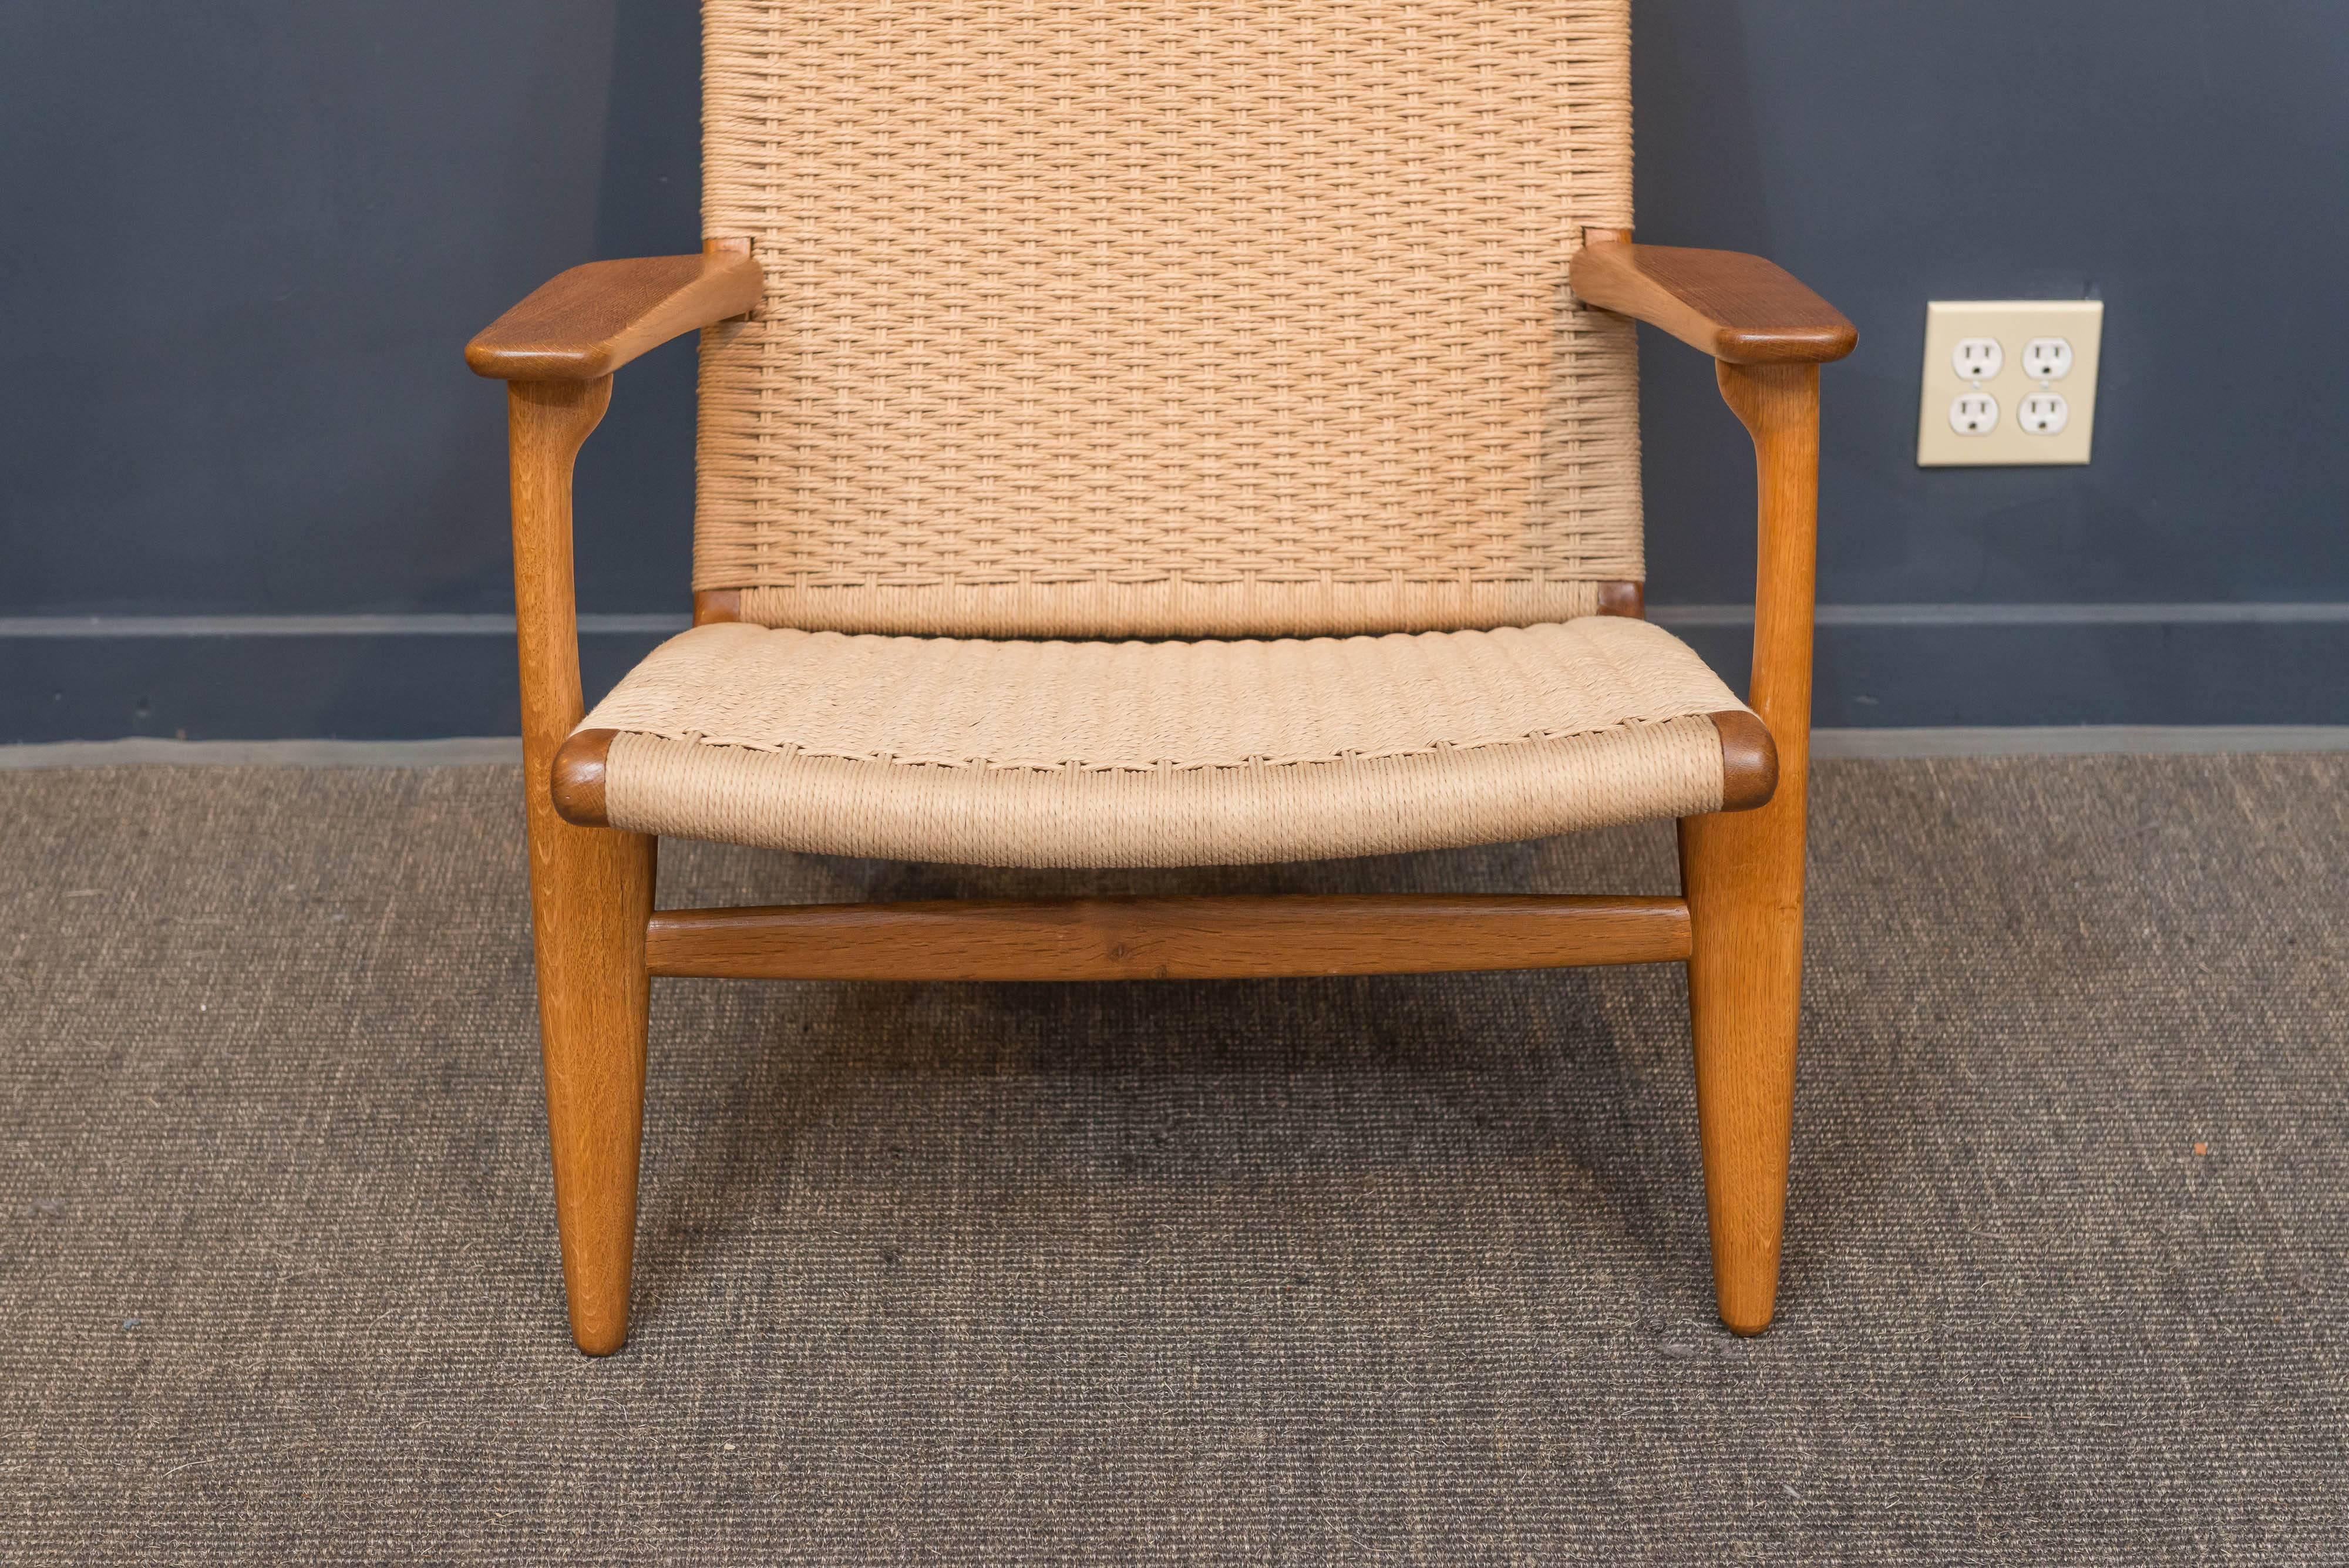 Hans J Wegner design lounge chair model CH 25 fro Carl Hanson & Son, Denmark.
Perfectly refinished oak with an expertly new woven Danish cord seat and back, better than new.
Stamped, original example.